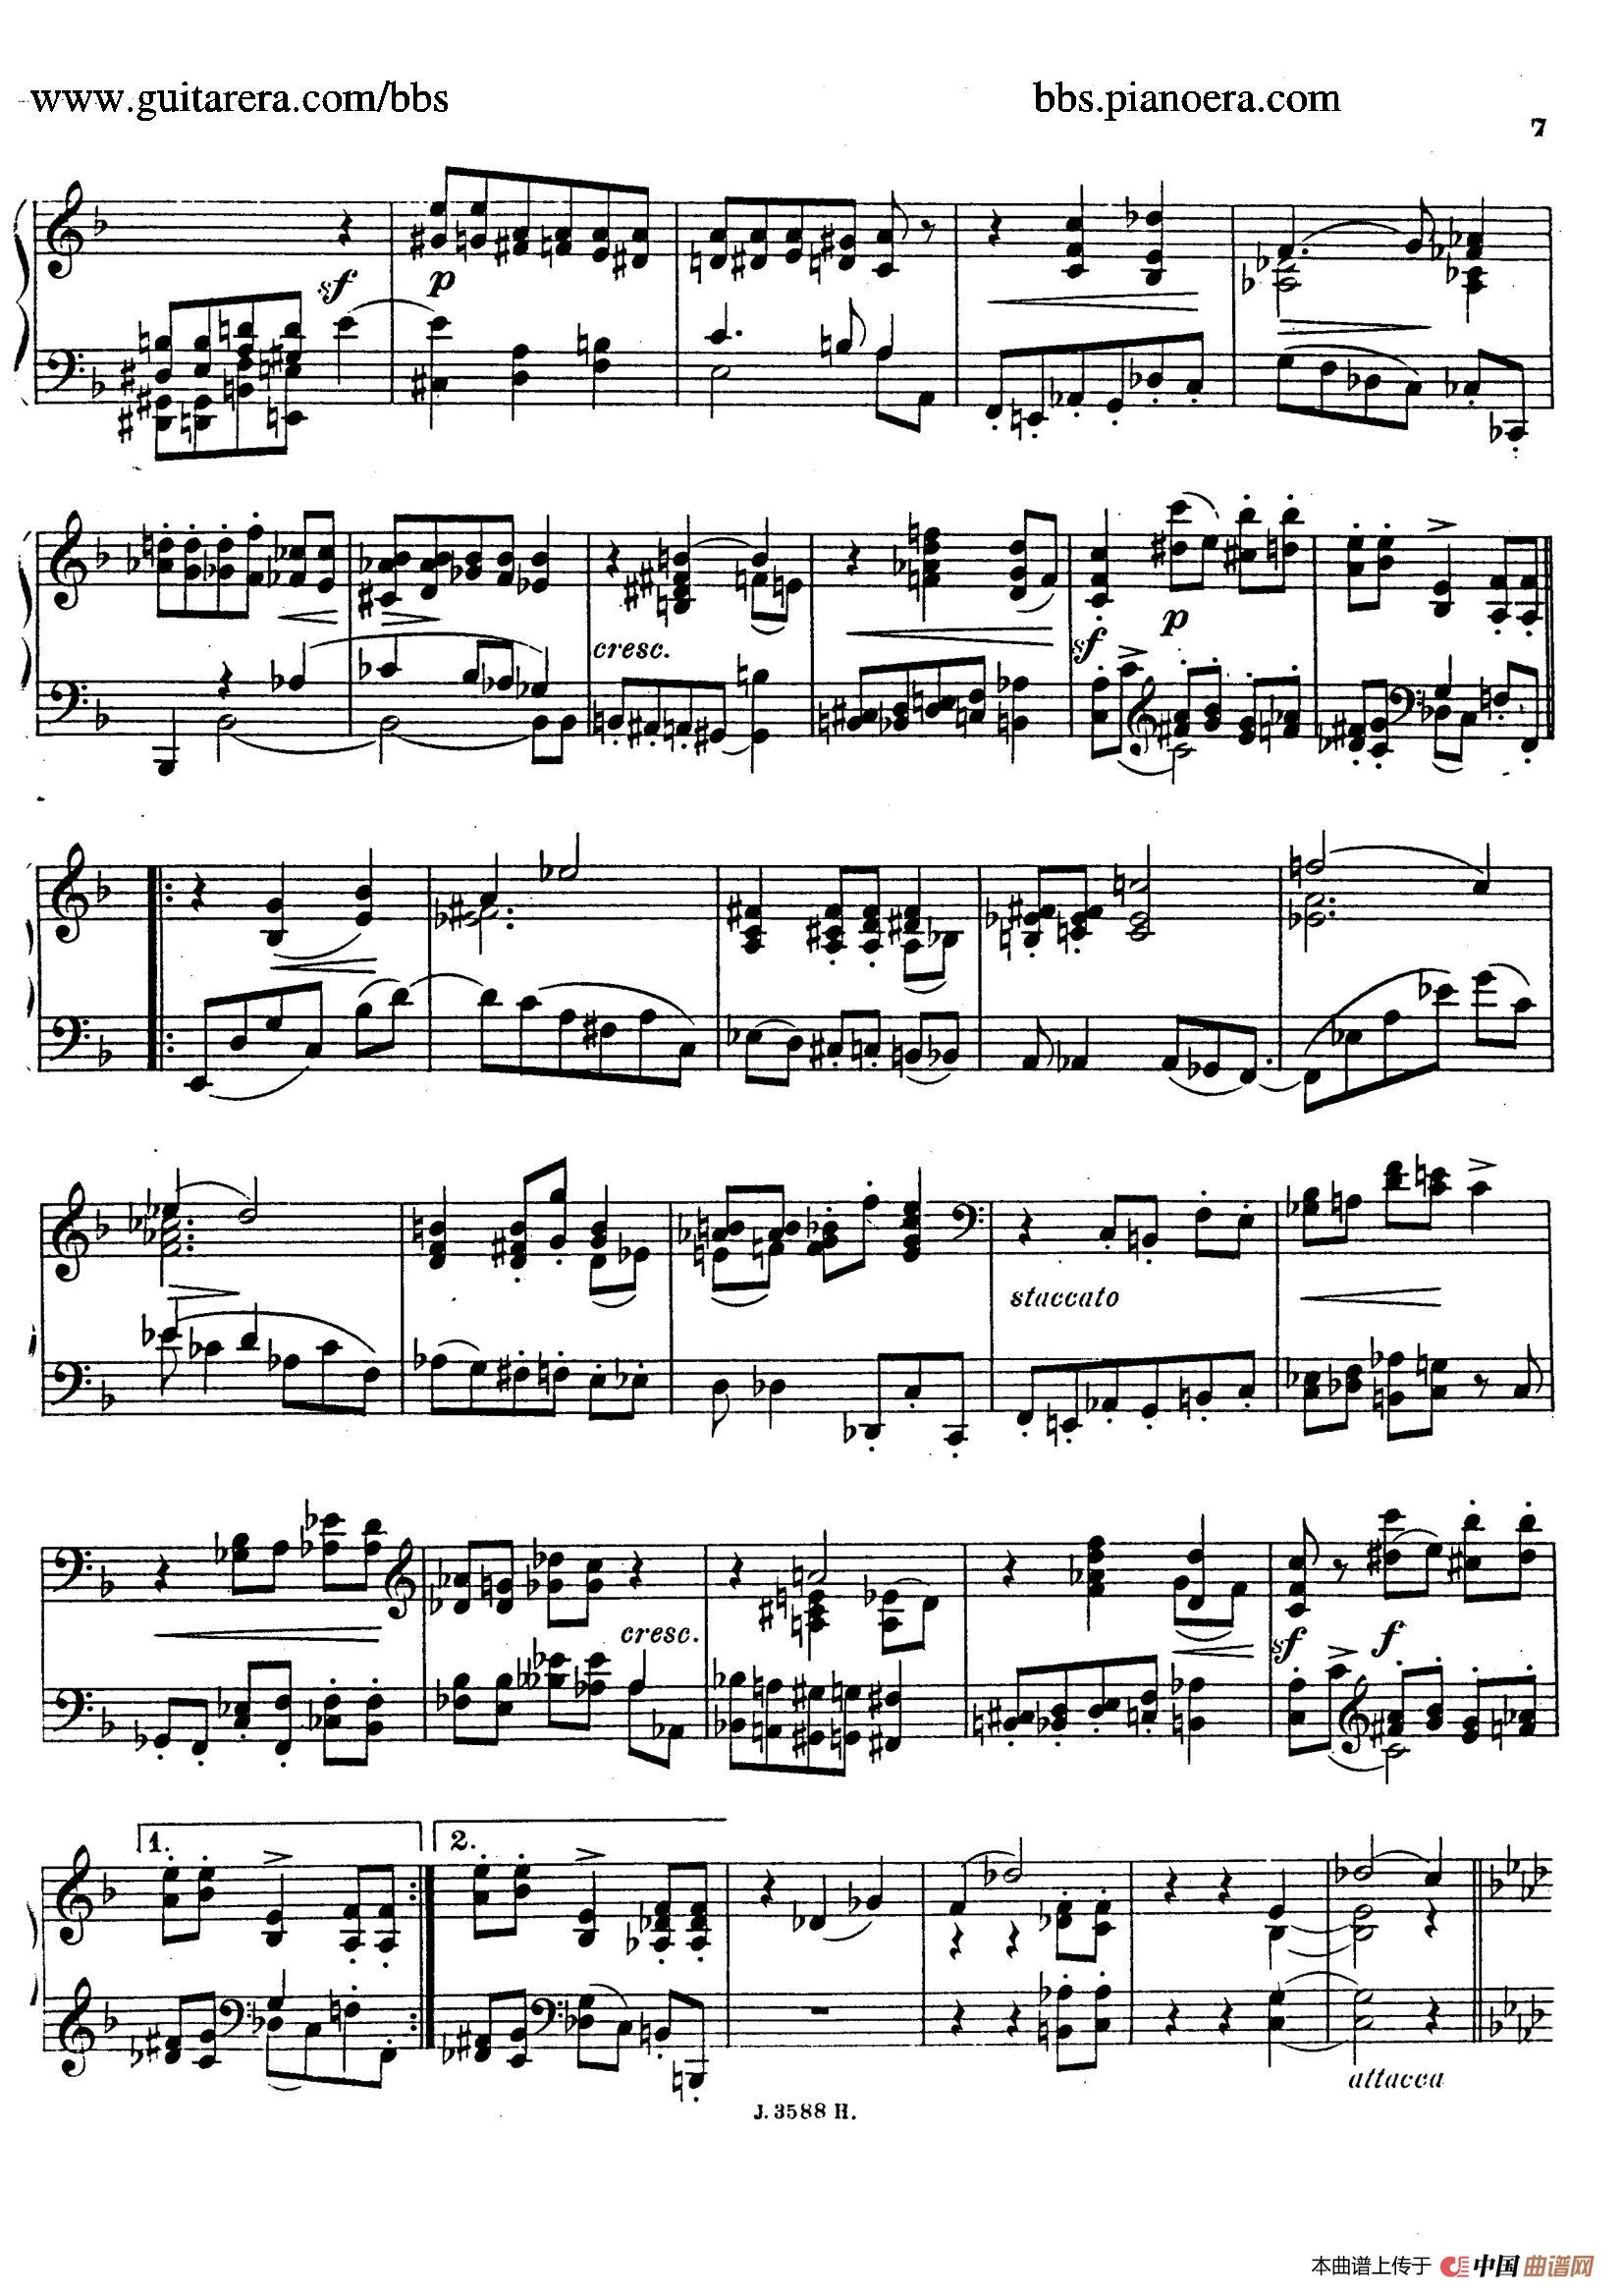 《Theme with Variations and Fugue in F Major Op.14 》钢琴曲谱图分享